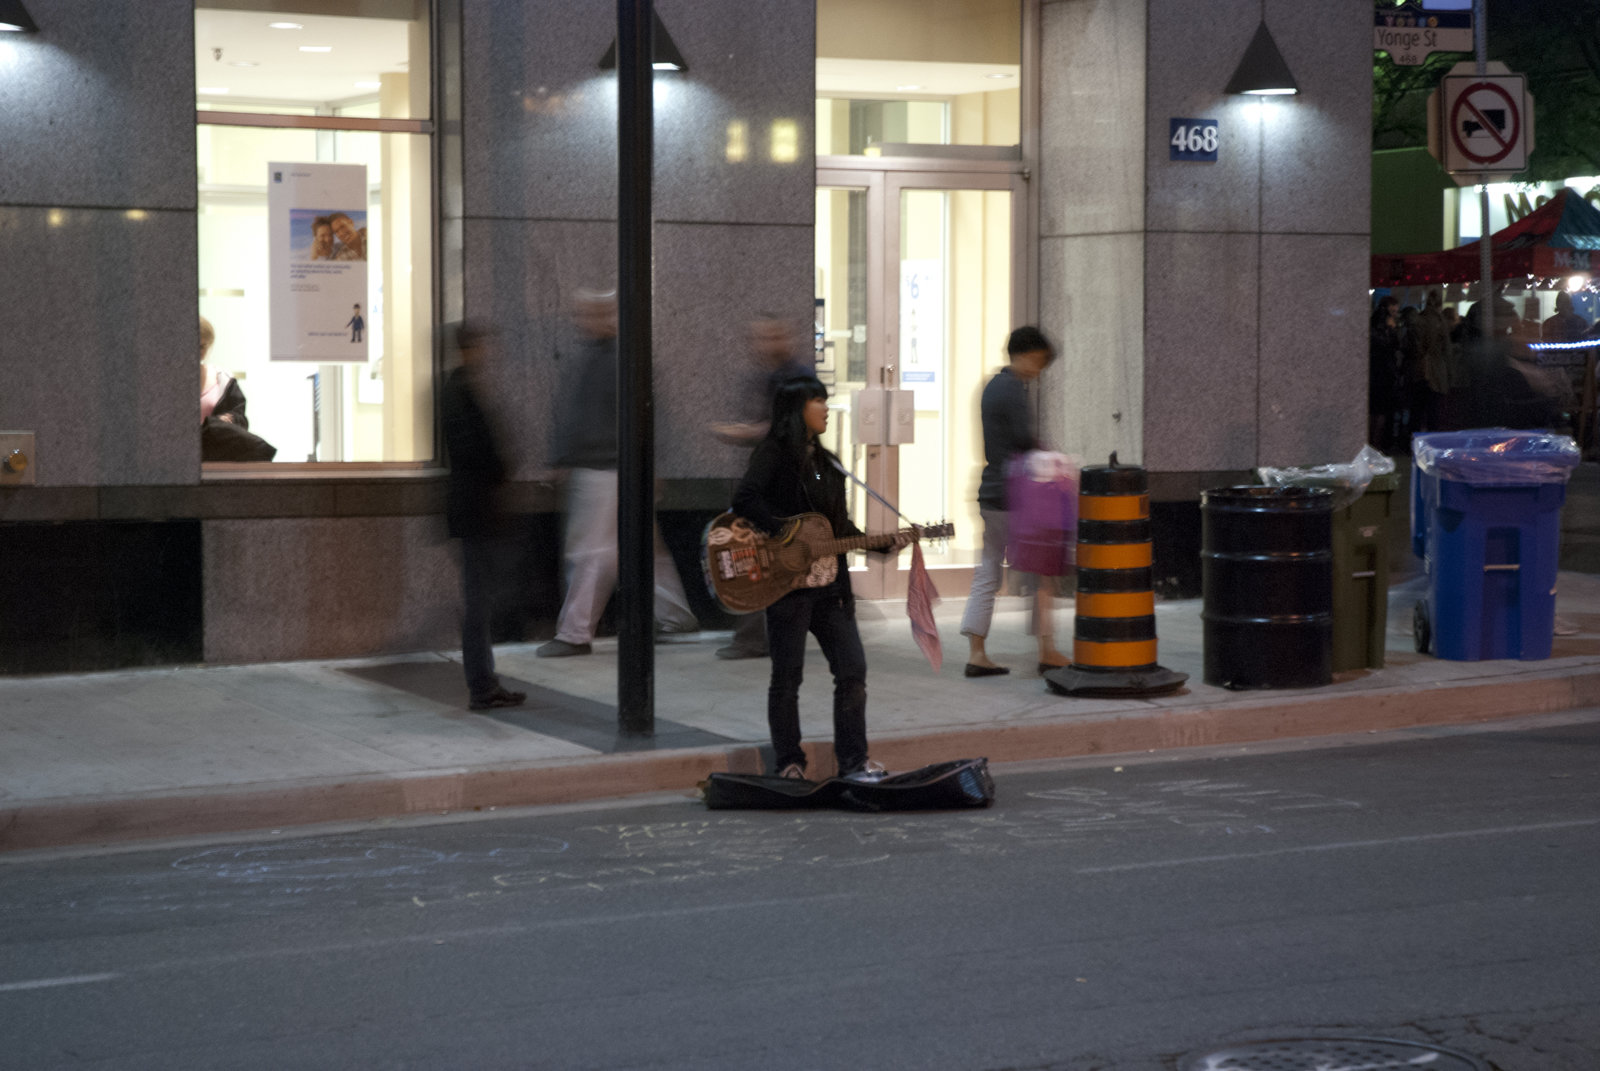 Kevin Schmidt, Will You Love Me Tomorrow?, 2011, performance, 12 hours. Documentation, Nuit Blanche, Toronto, 2011